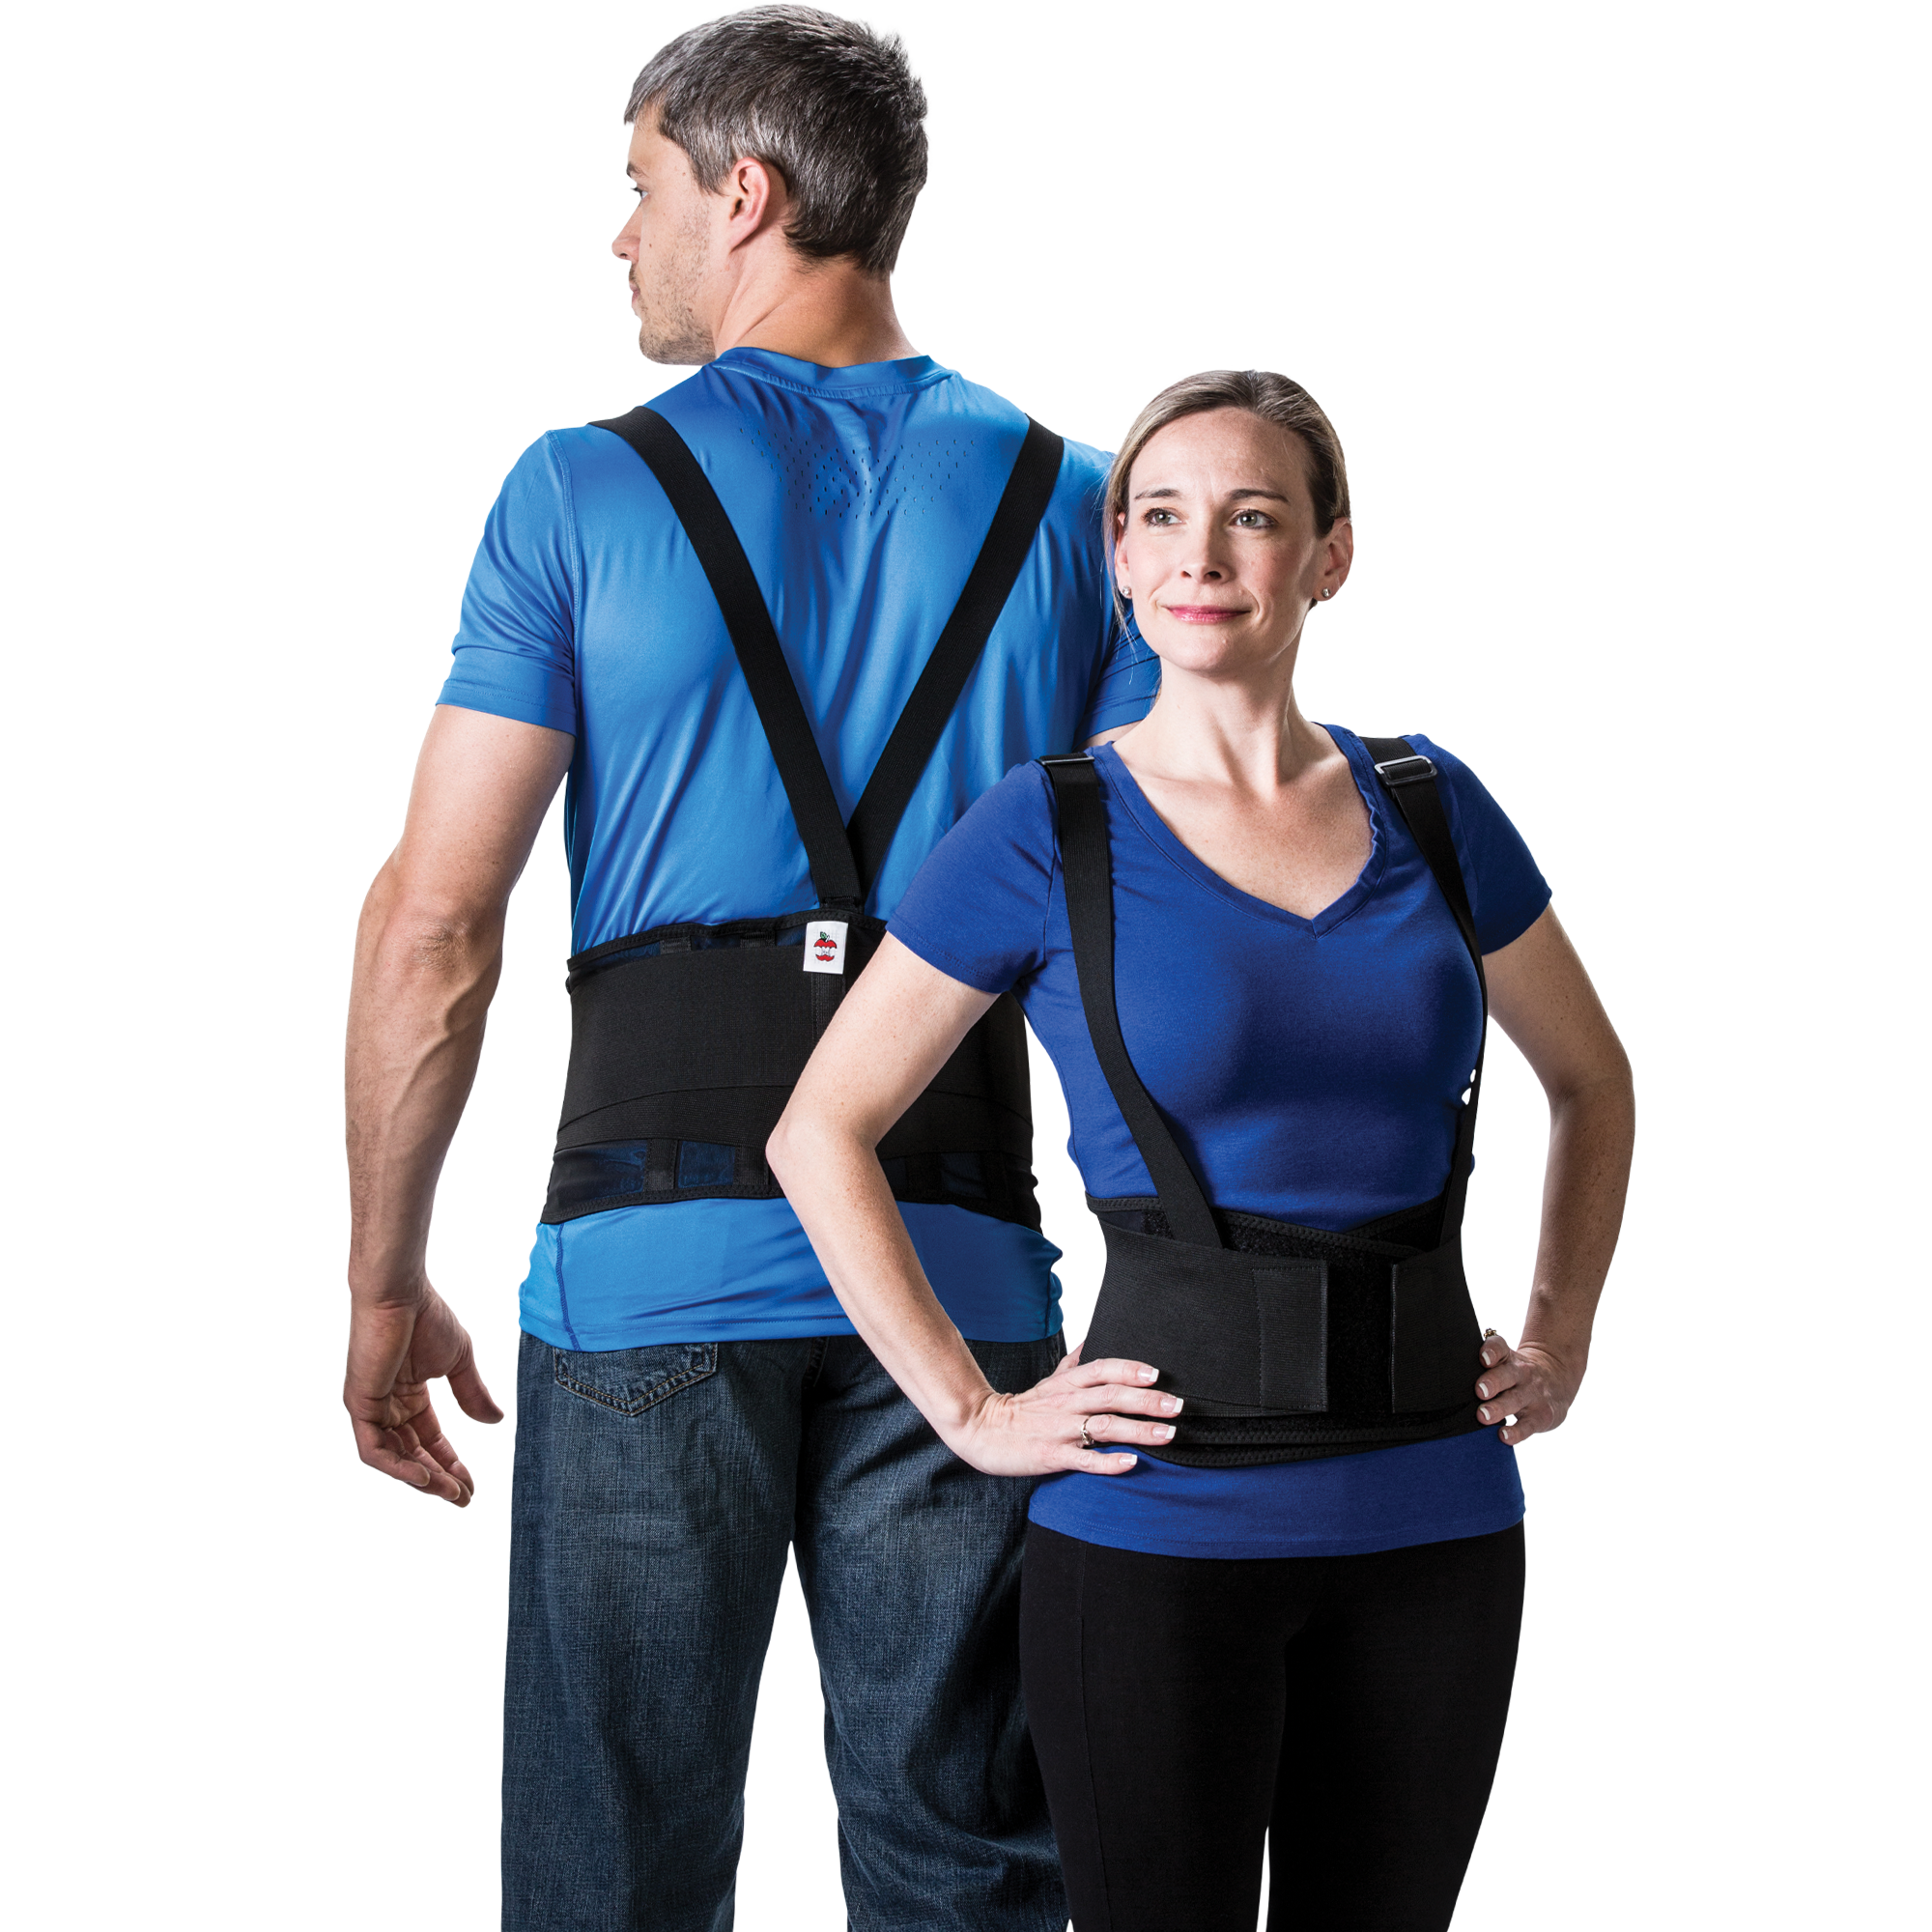 Industrial Work Back Brace Waist Pain Protection Belt with